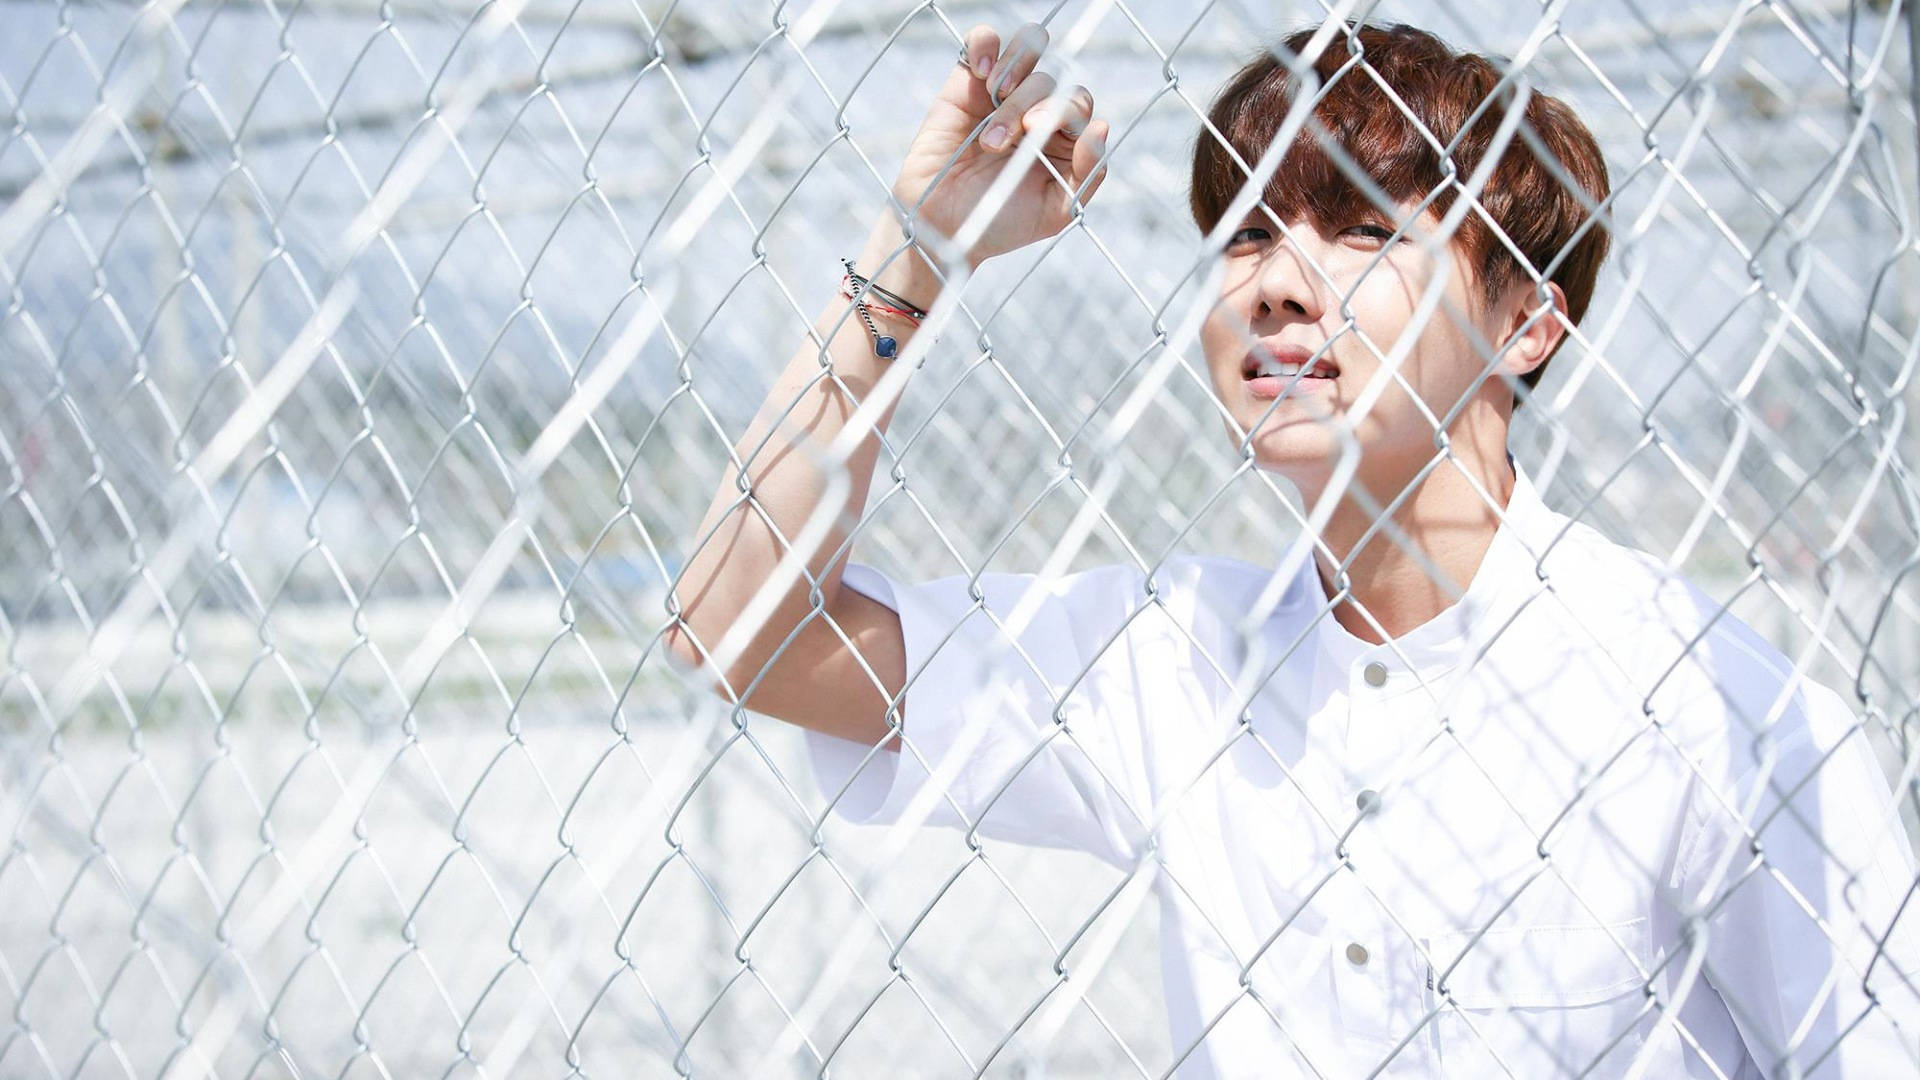 J-Hope Holding On A Fence Wallpaper